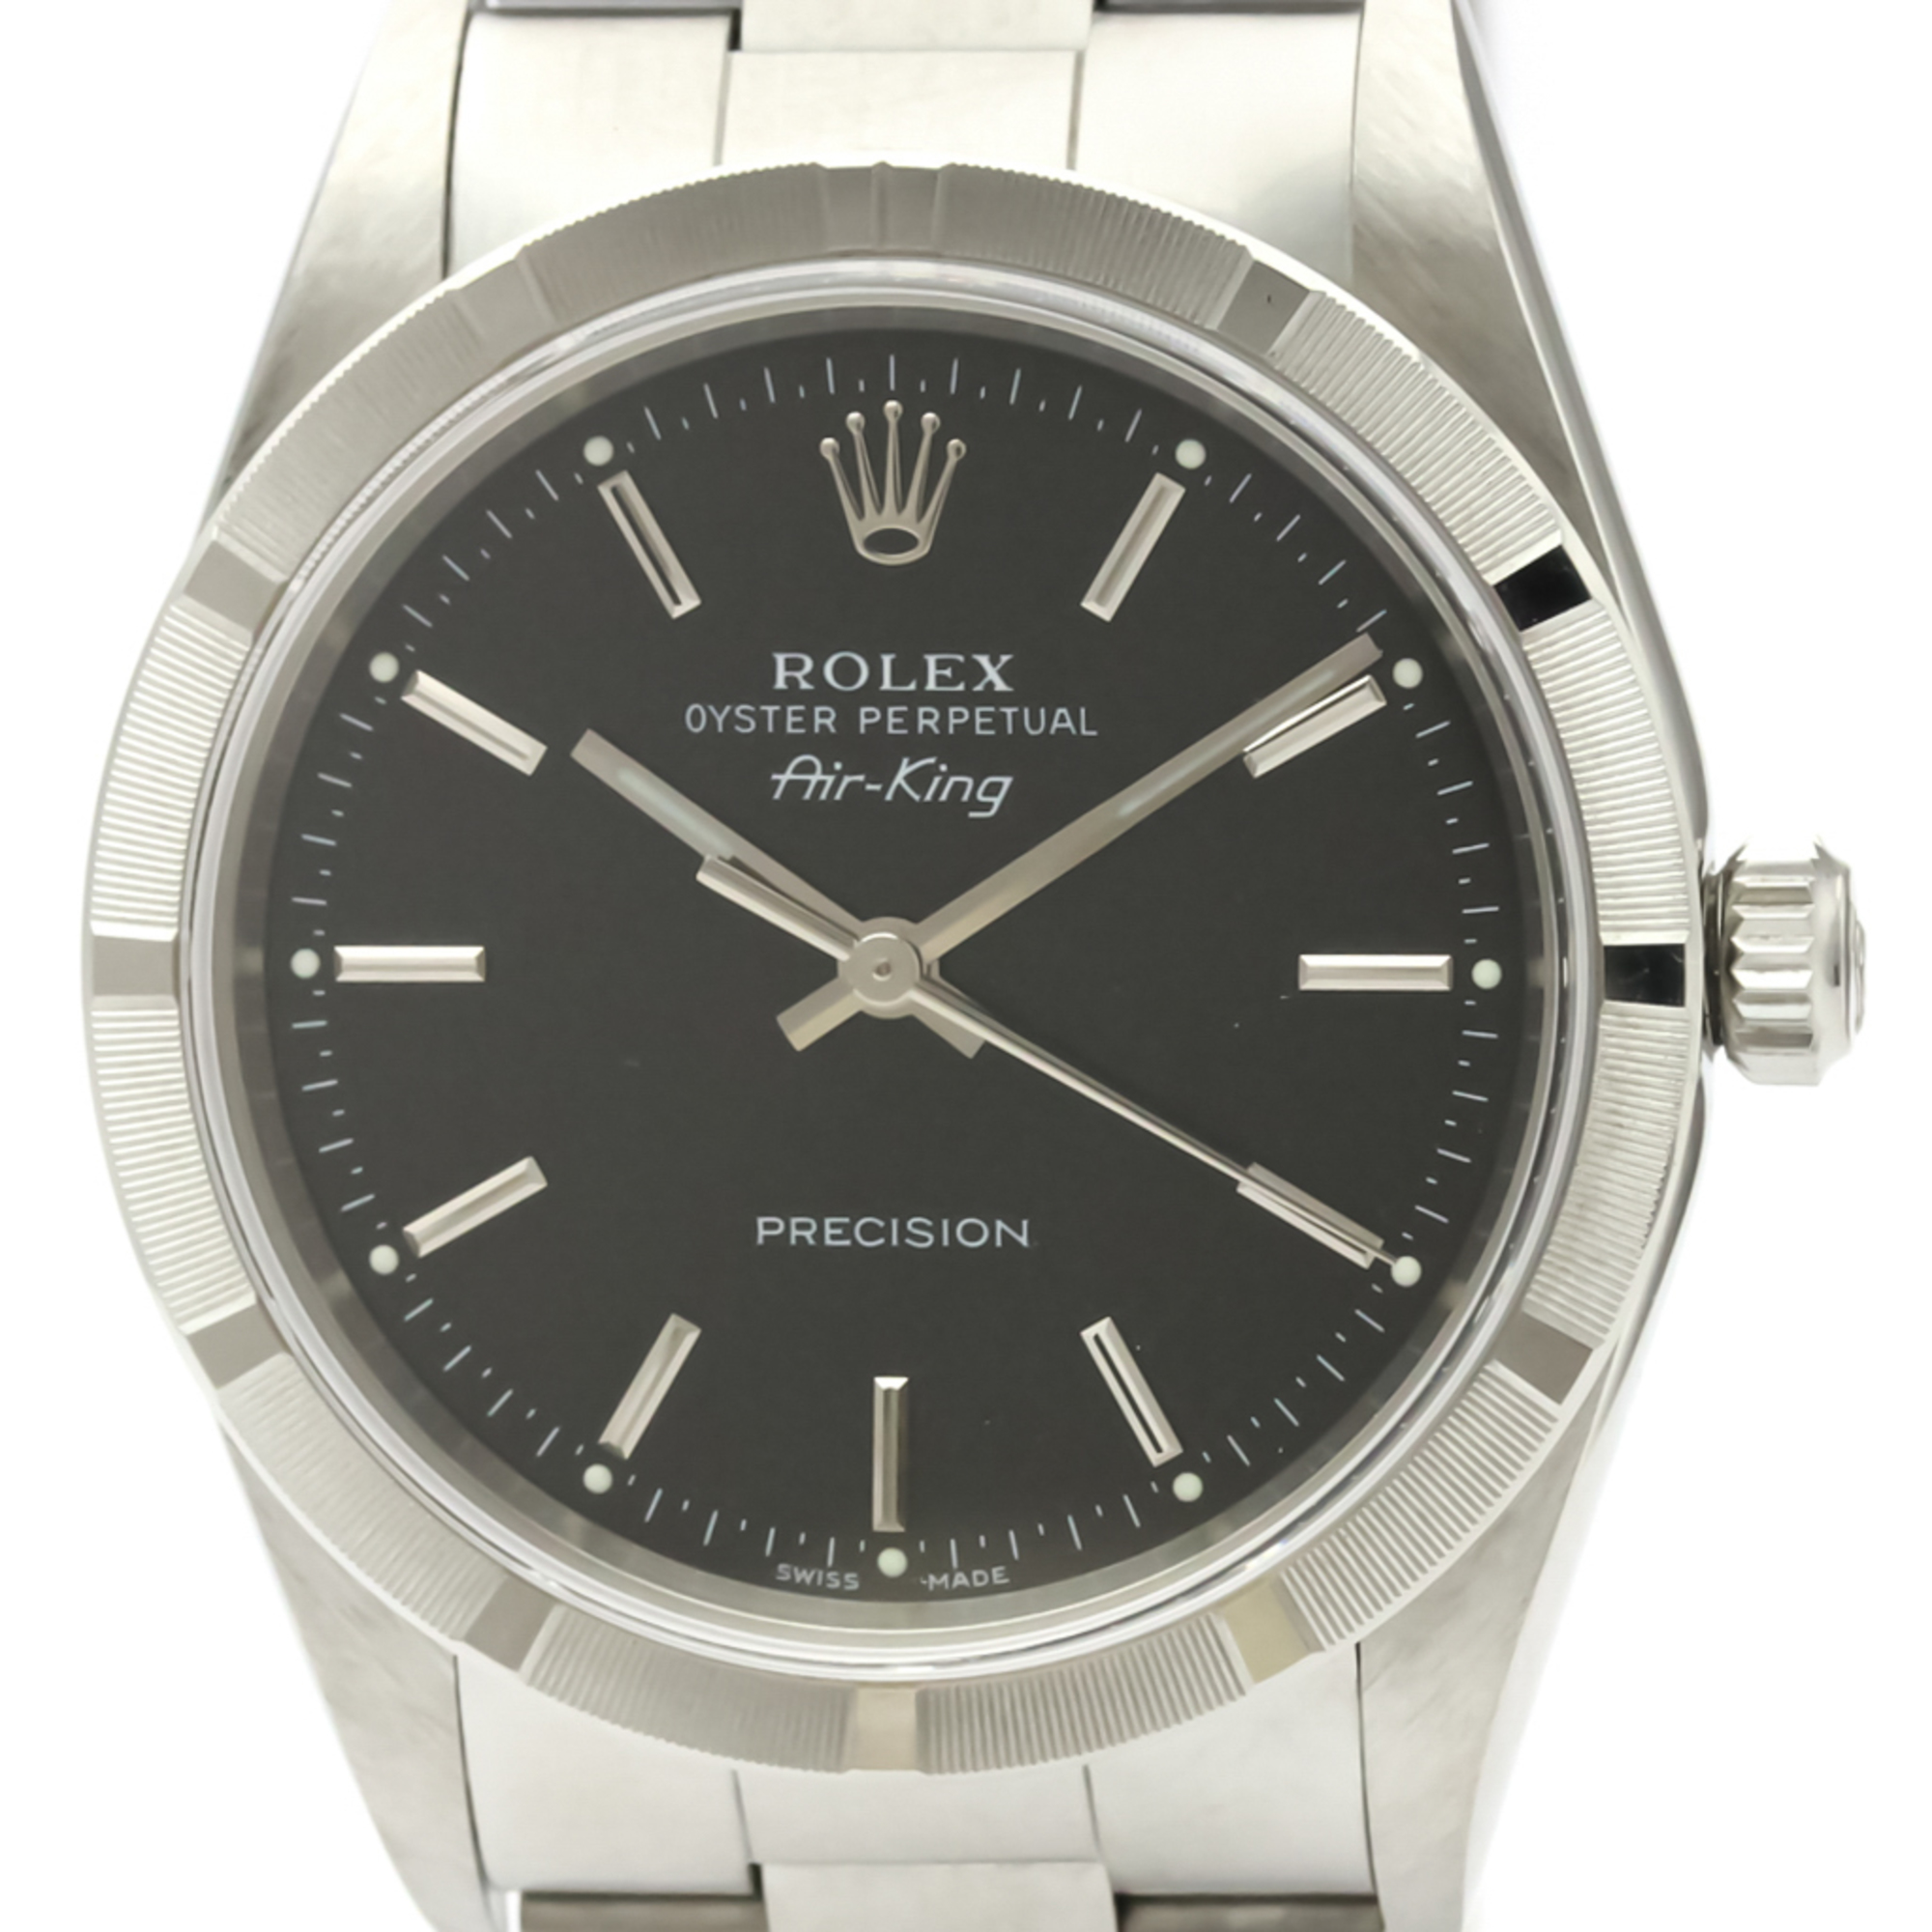 Rolex Airking Automatic Stainless Steel Men's Dress Watch 14010